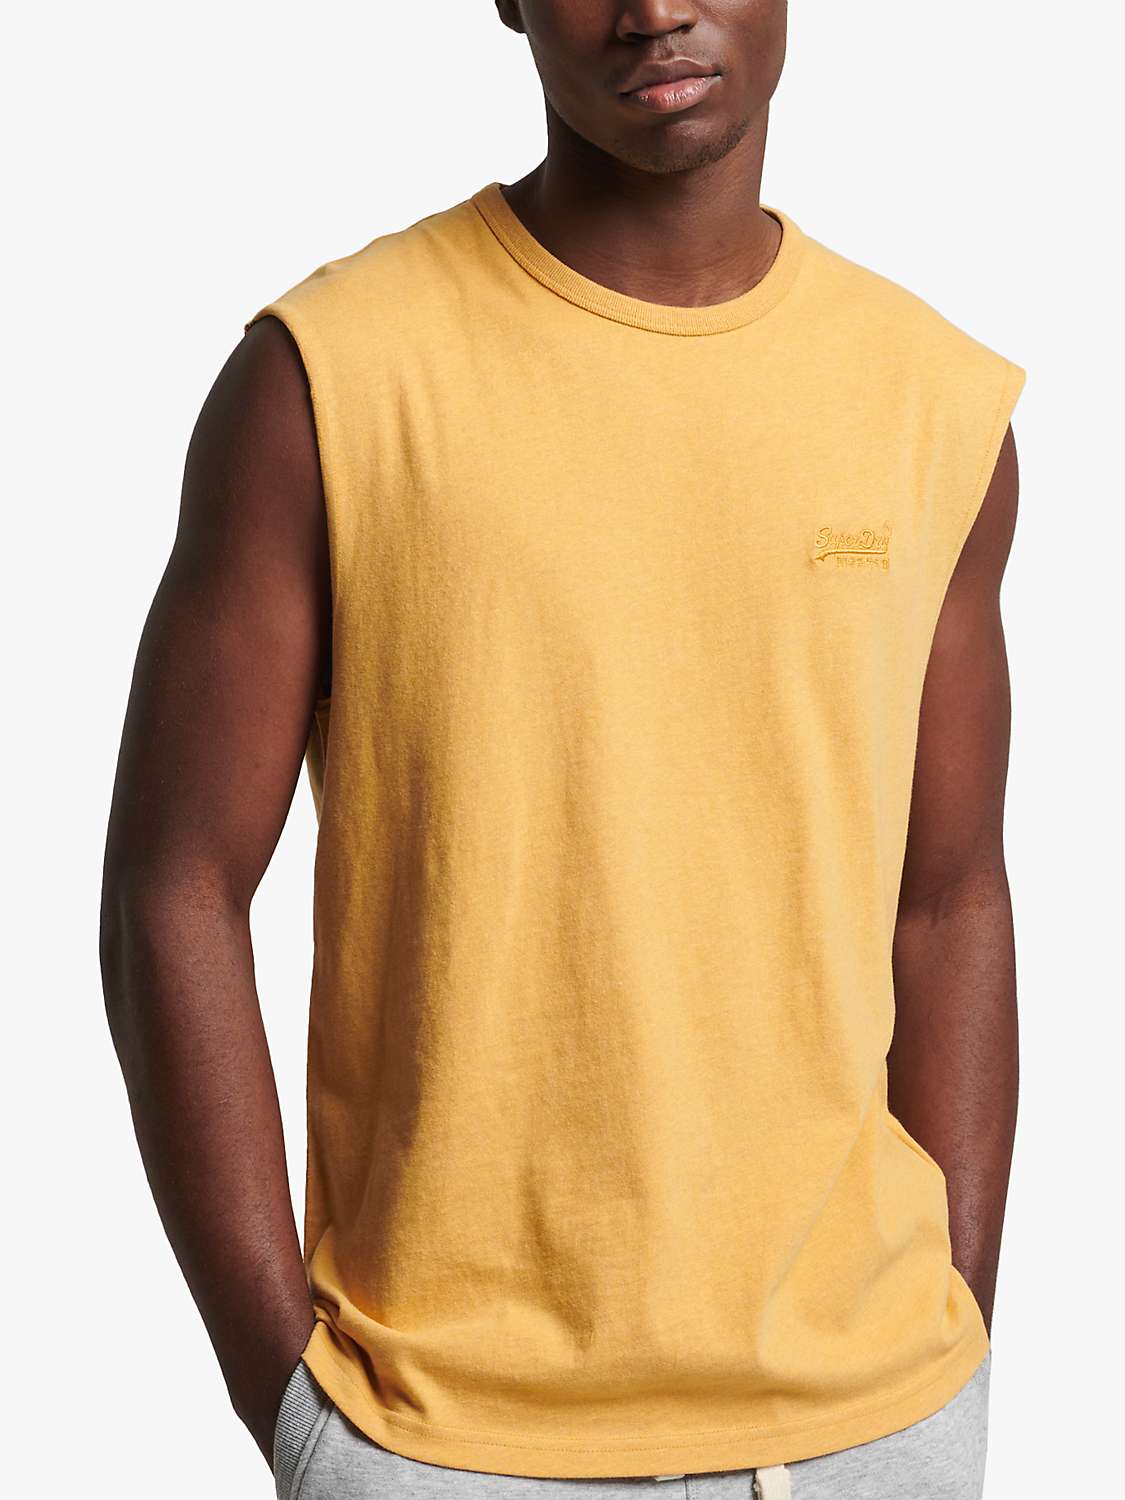 Buy Superdry Classic Organic Cotton Tank Top Online at johnlewis.com